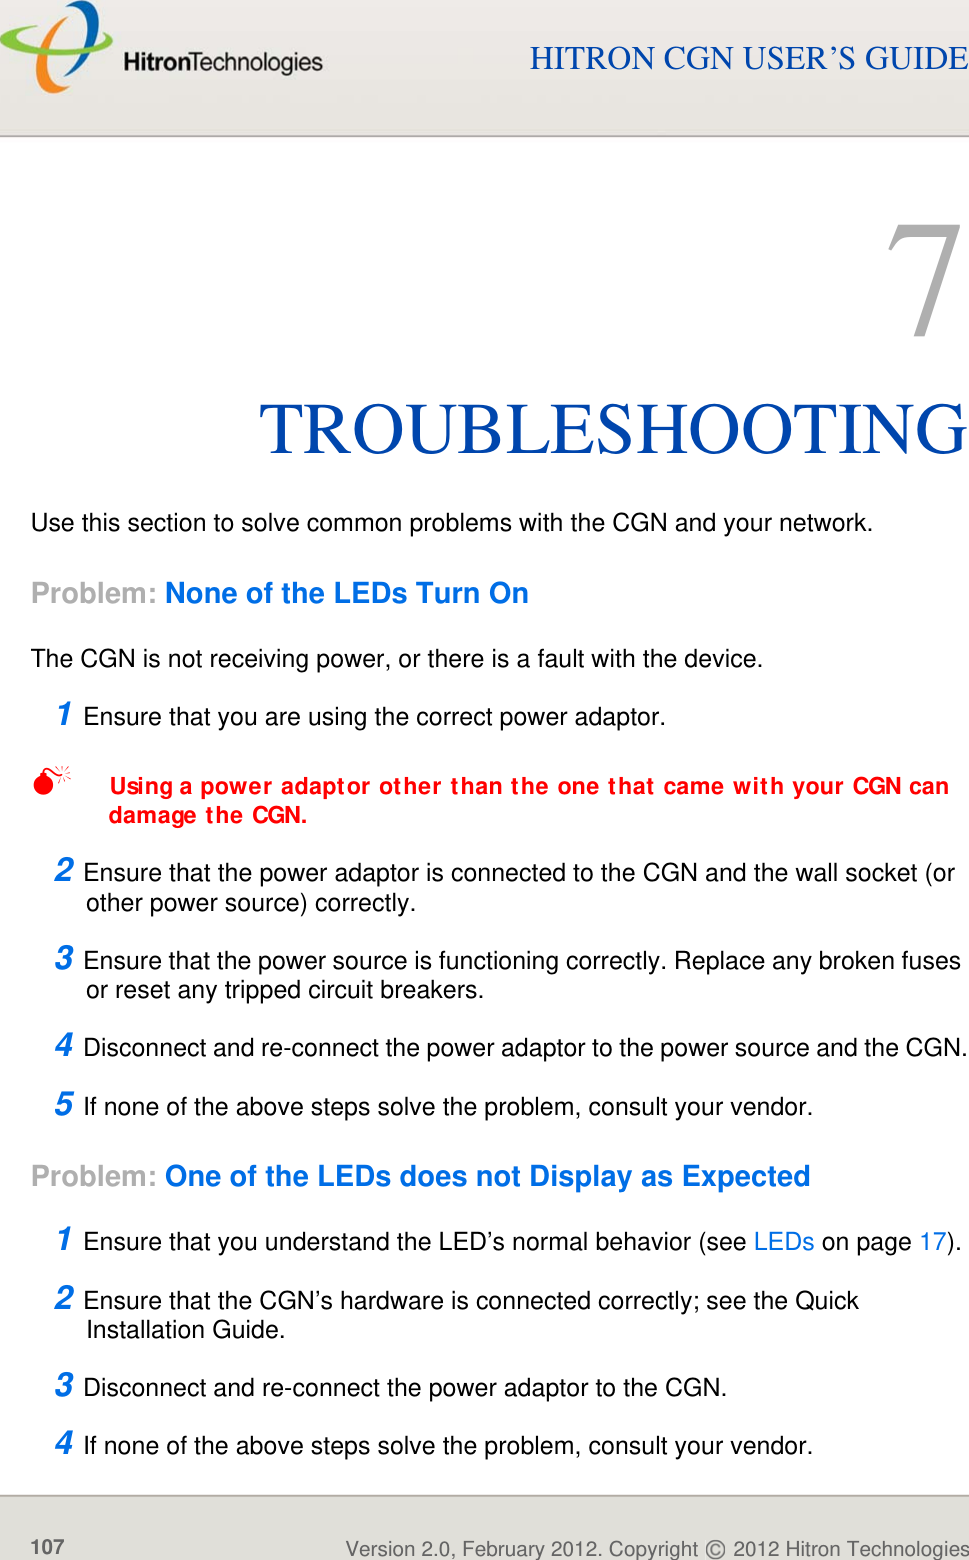 TROUBLESHOOTINGVersion 2.0, February 2012. Copyright   2012 Hitron Technologies107HITRON CGN USER’S GUIDE7TROUBLESHOOTINGUse this section to solve common problems with the CGN and your network.Problem: None of the LEDs Turn OnThe CGN is not receiving power, or there is a fault with the device.1 Ensure that you are using the correct power adaptor.Using a power adaptor other than the one that came with your CGN can damage the CGN.2 Ensure that the power adaptor is connected to the CGN and the wall socket (or other power source) correctly.3 Ensure that the power source is functioning correctly. Replace any broken fuses or reset any tripped circuit breakers.4 Disconnect and re-connect the power adaptor to the power source and the CGN.5 If none of the above steps solve the problem, consult your vendor.Problem: One of the LEDs does not Display as Expected1 Ensure that you understand the LED’s normal behavior (see LEDs on page 17).2 Ensure that the CGN’s hardware is connected correctly; see the Quick Installation Guide.3 Disconnect and re-connect the power adaptor to the CGN.4 If none of the above steps solve the problem, consult your vendor.